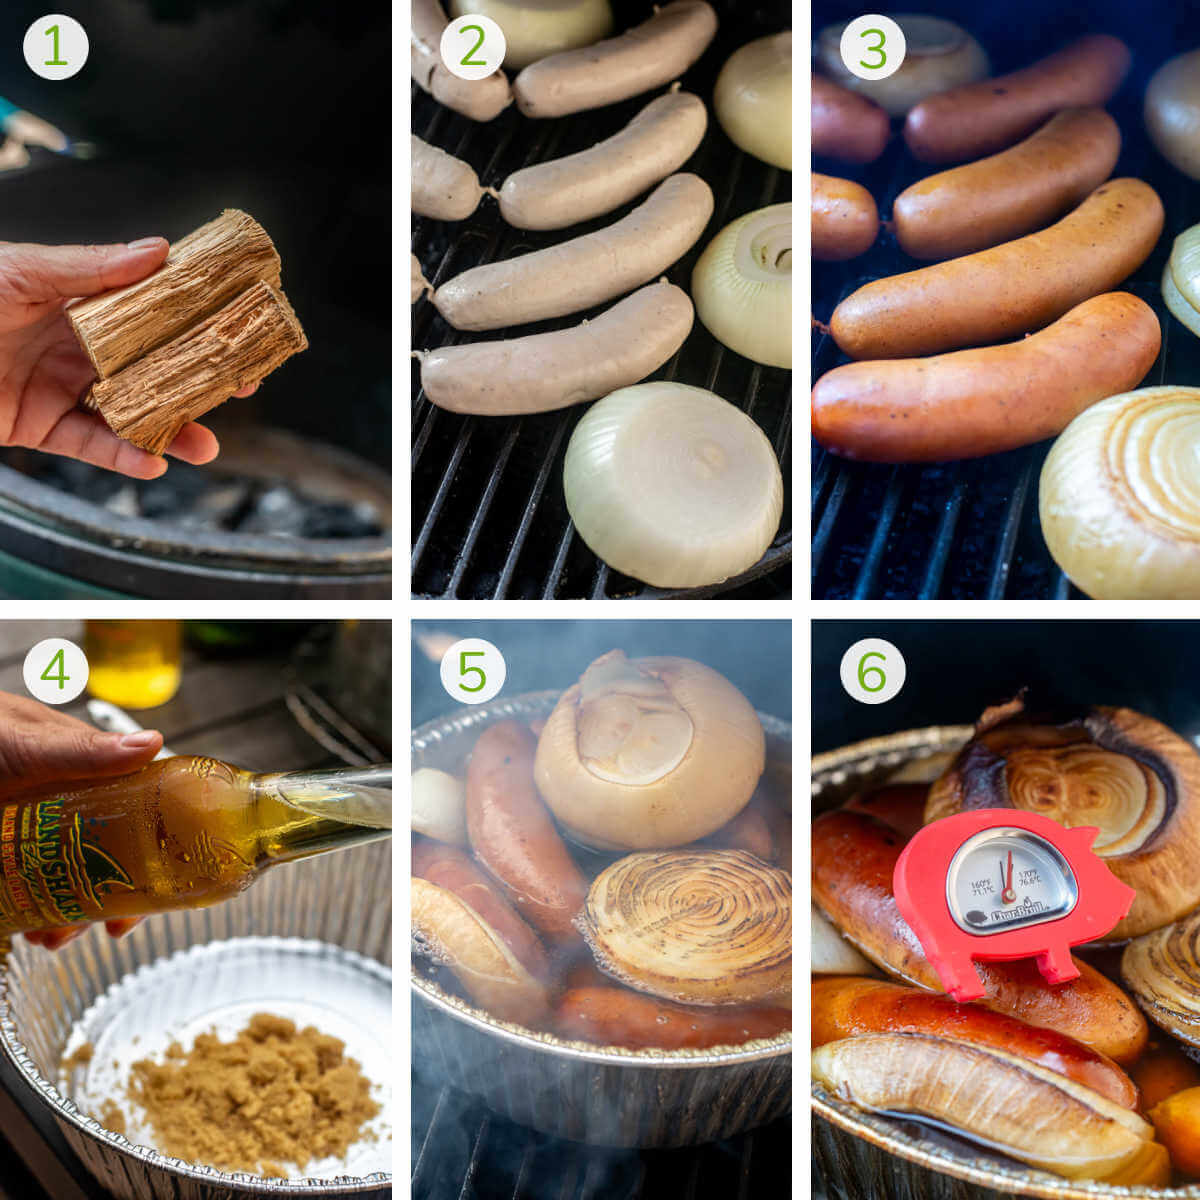 six process photos showing adding wood to the smoker, smoking the bratwurst, mixing the beer and brown sugar and then finishing the cooking until the brats are at a safe temperature.